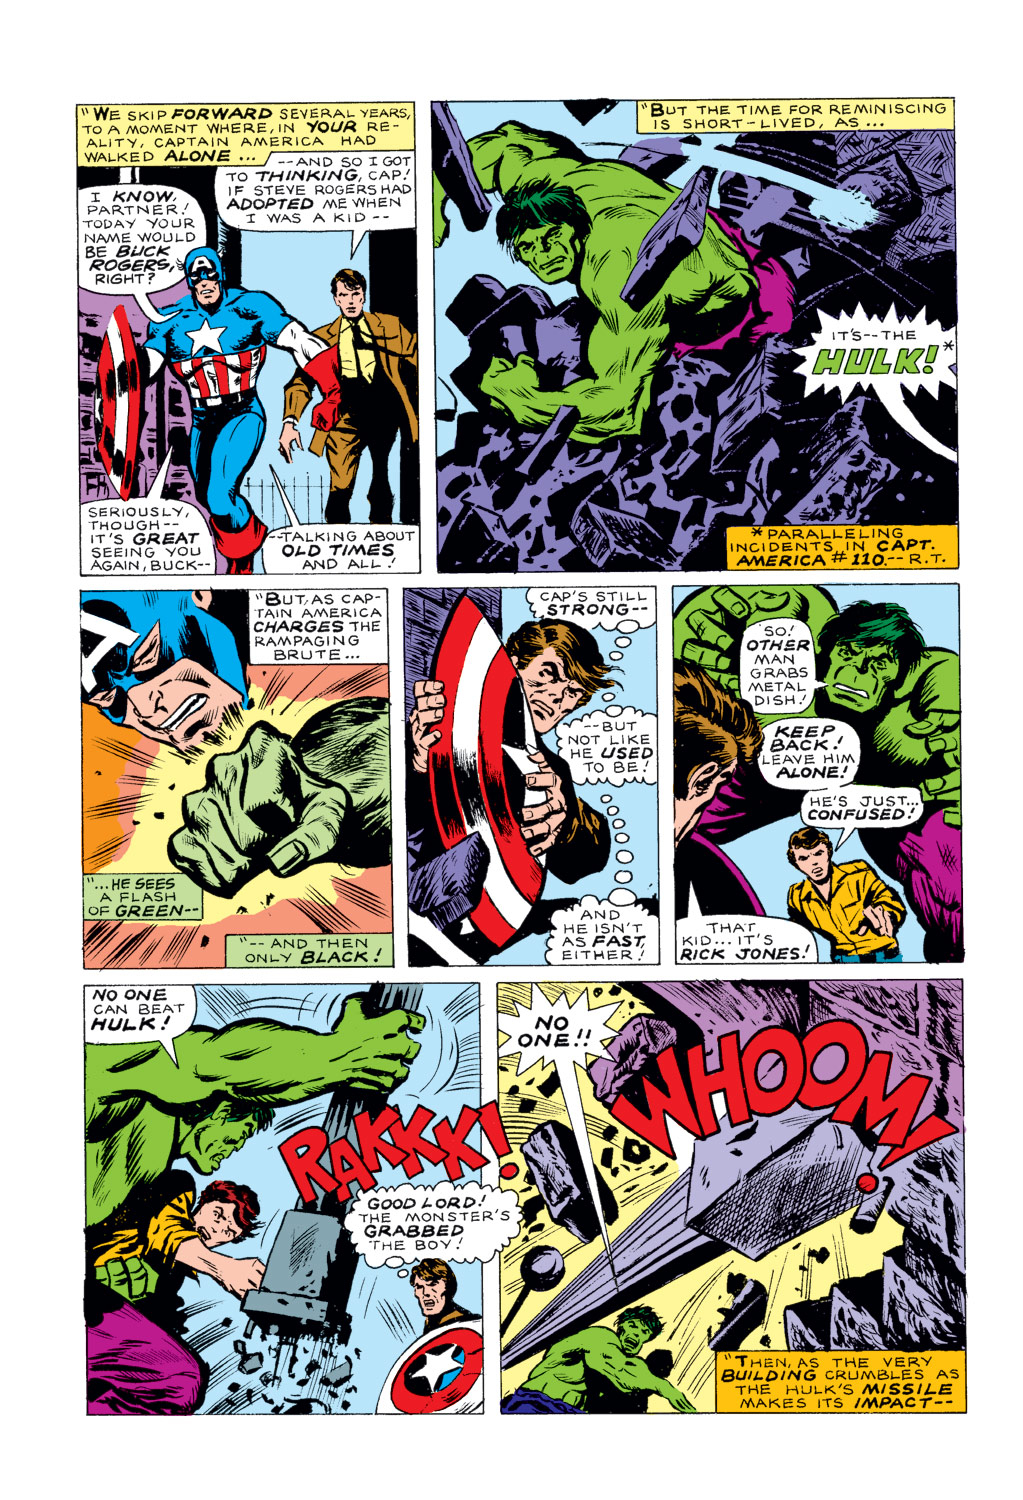 What If? (1977) Issue #5 - Captain America hadn't vanished during World War Two #5 - English 16